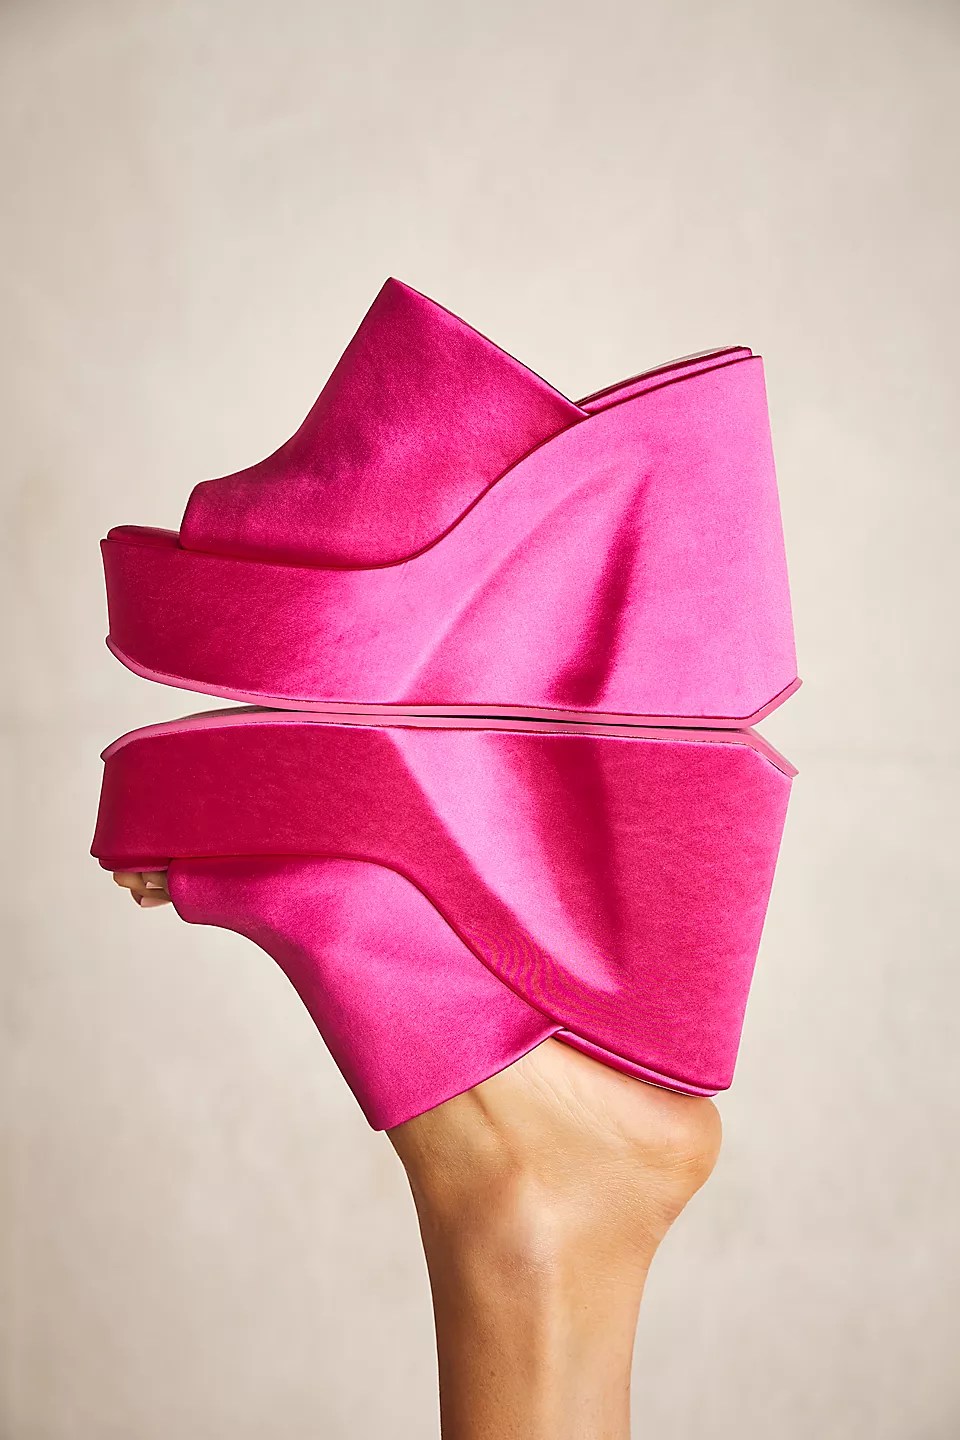 jeffrey campbell fuchsia satin wedge heels for holiday parties on a taupe background